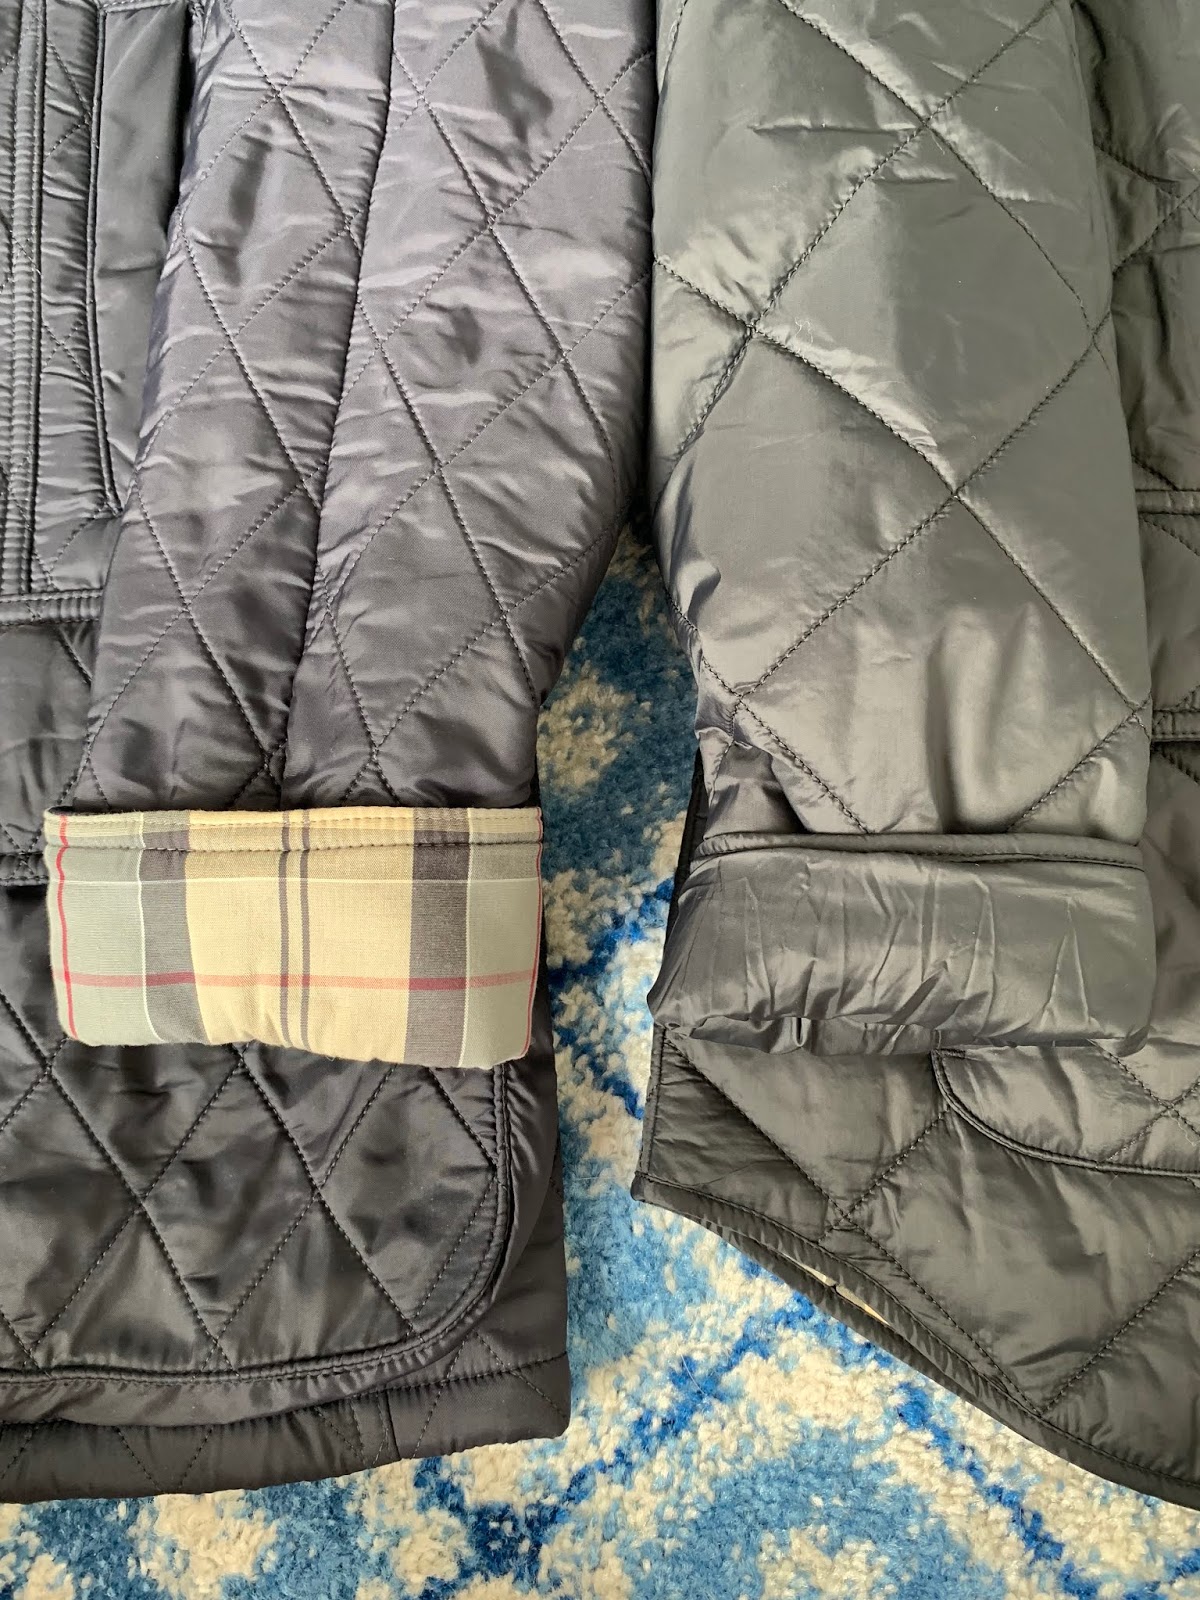 Review (+ Comparison) of the Barbour Jackets in the Nordstrom Sale ...